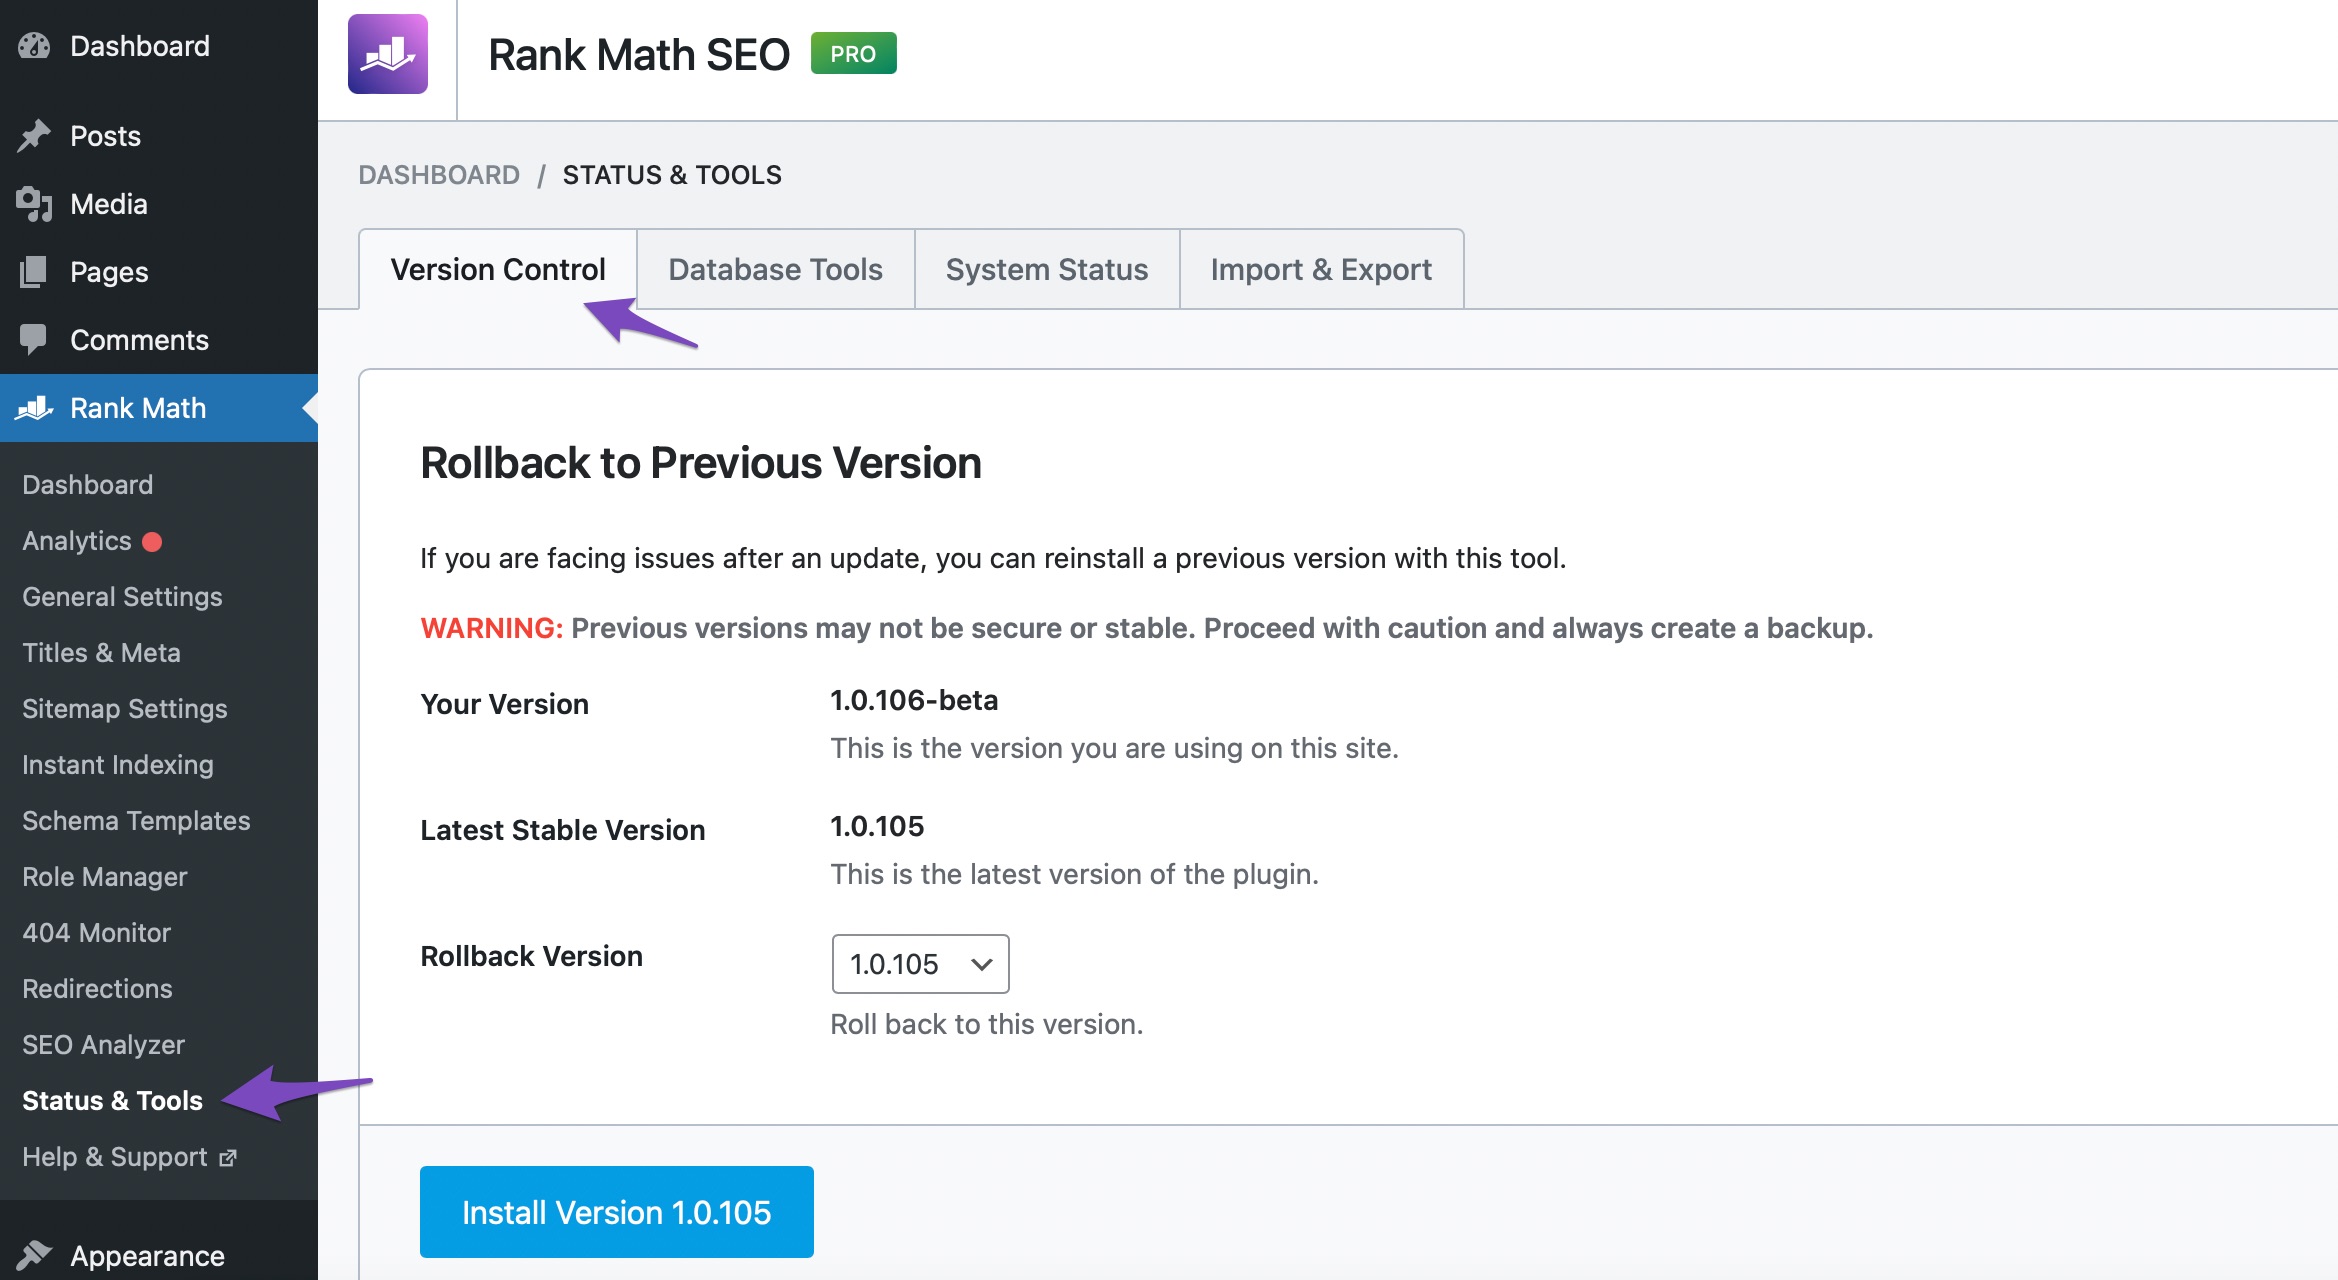 Check Rank Math version from Version Control